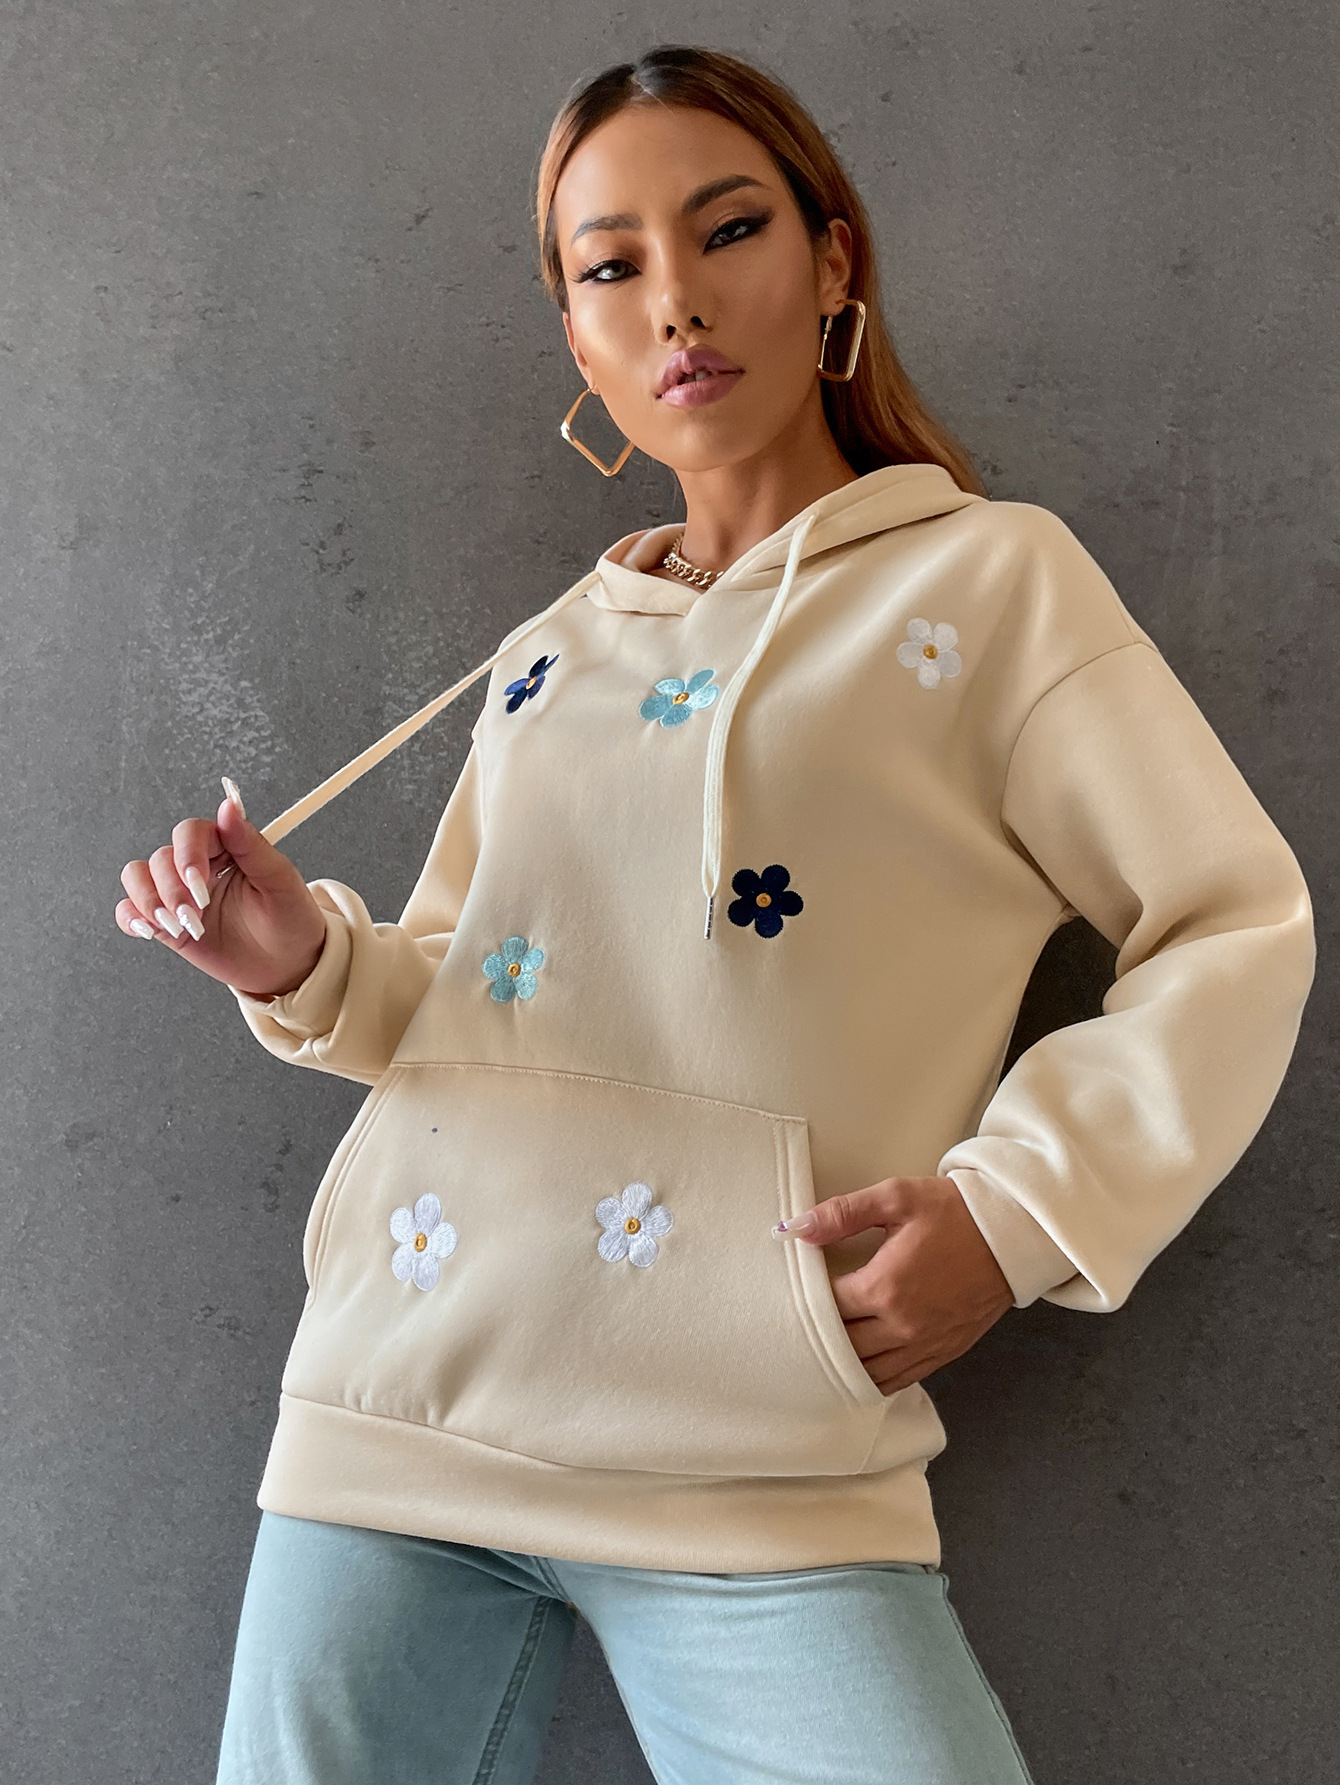 Flower Embroidery Casual Long-Sleeved Sports Hooded Sweatershirt NSGMY84148